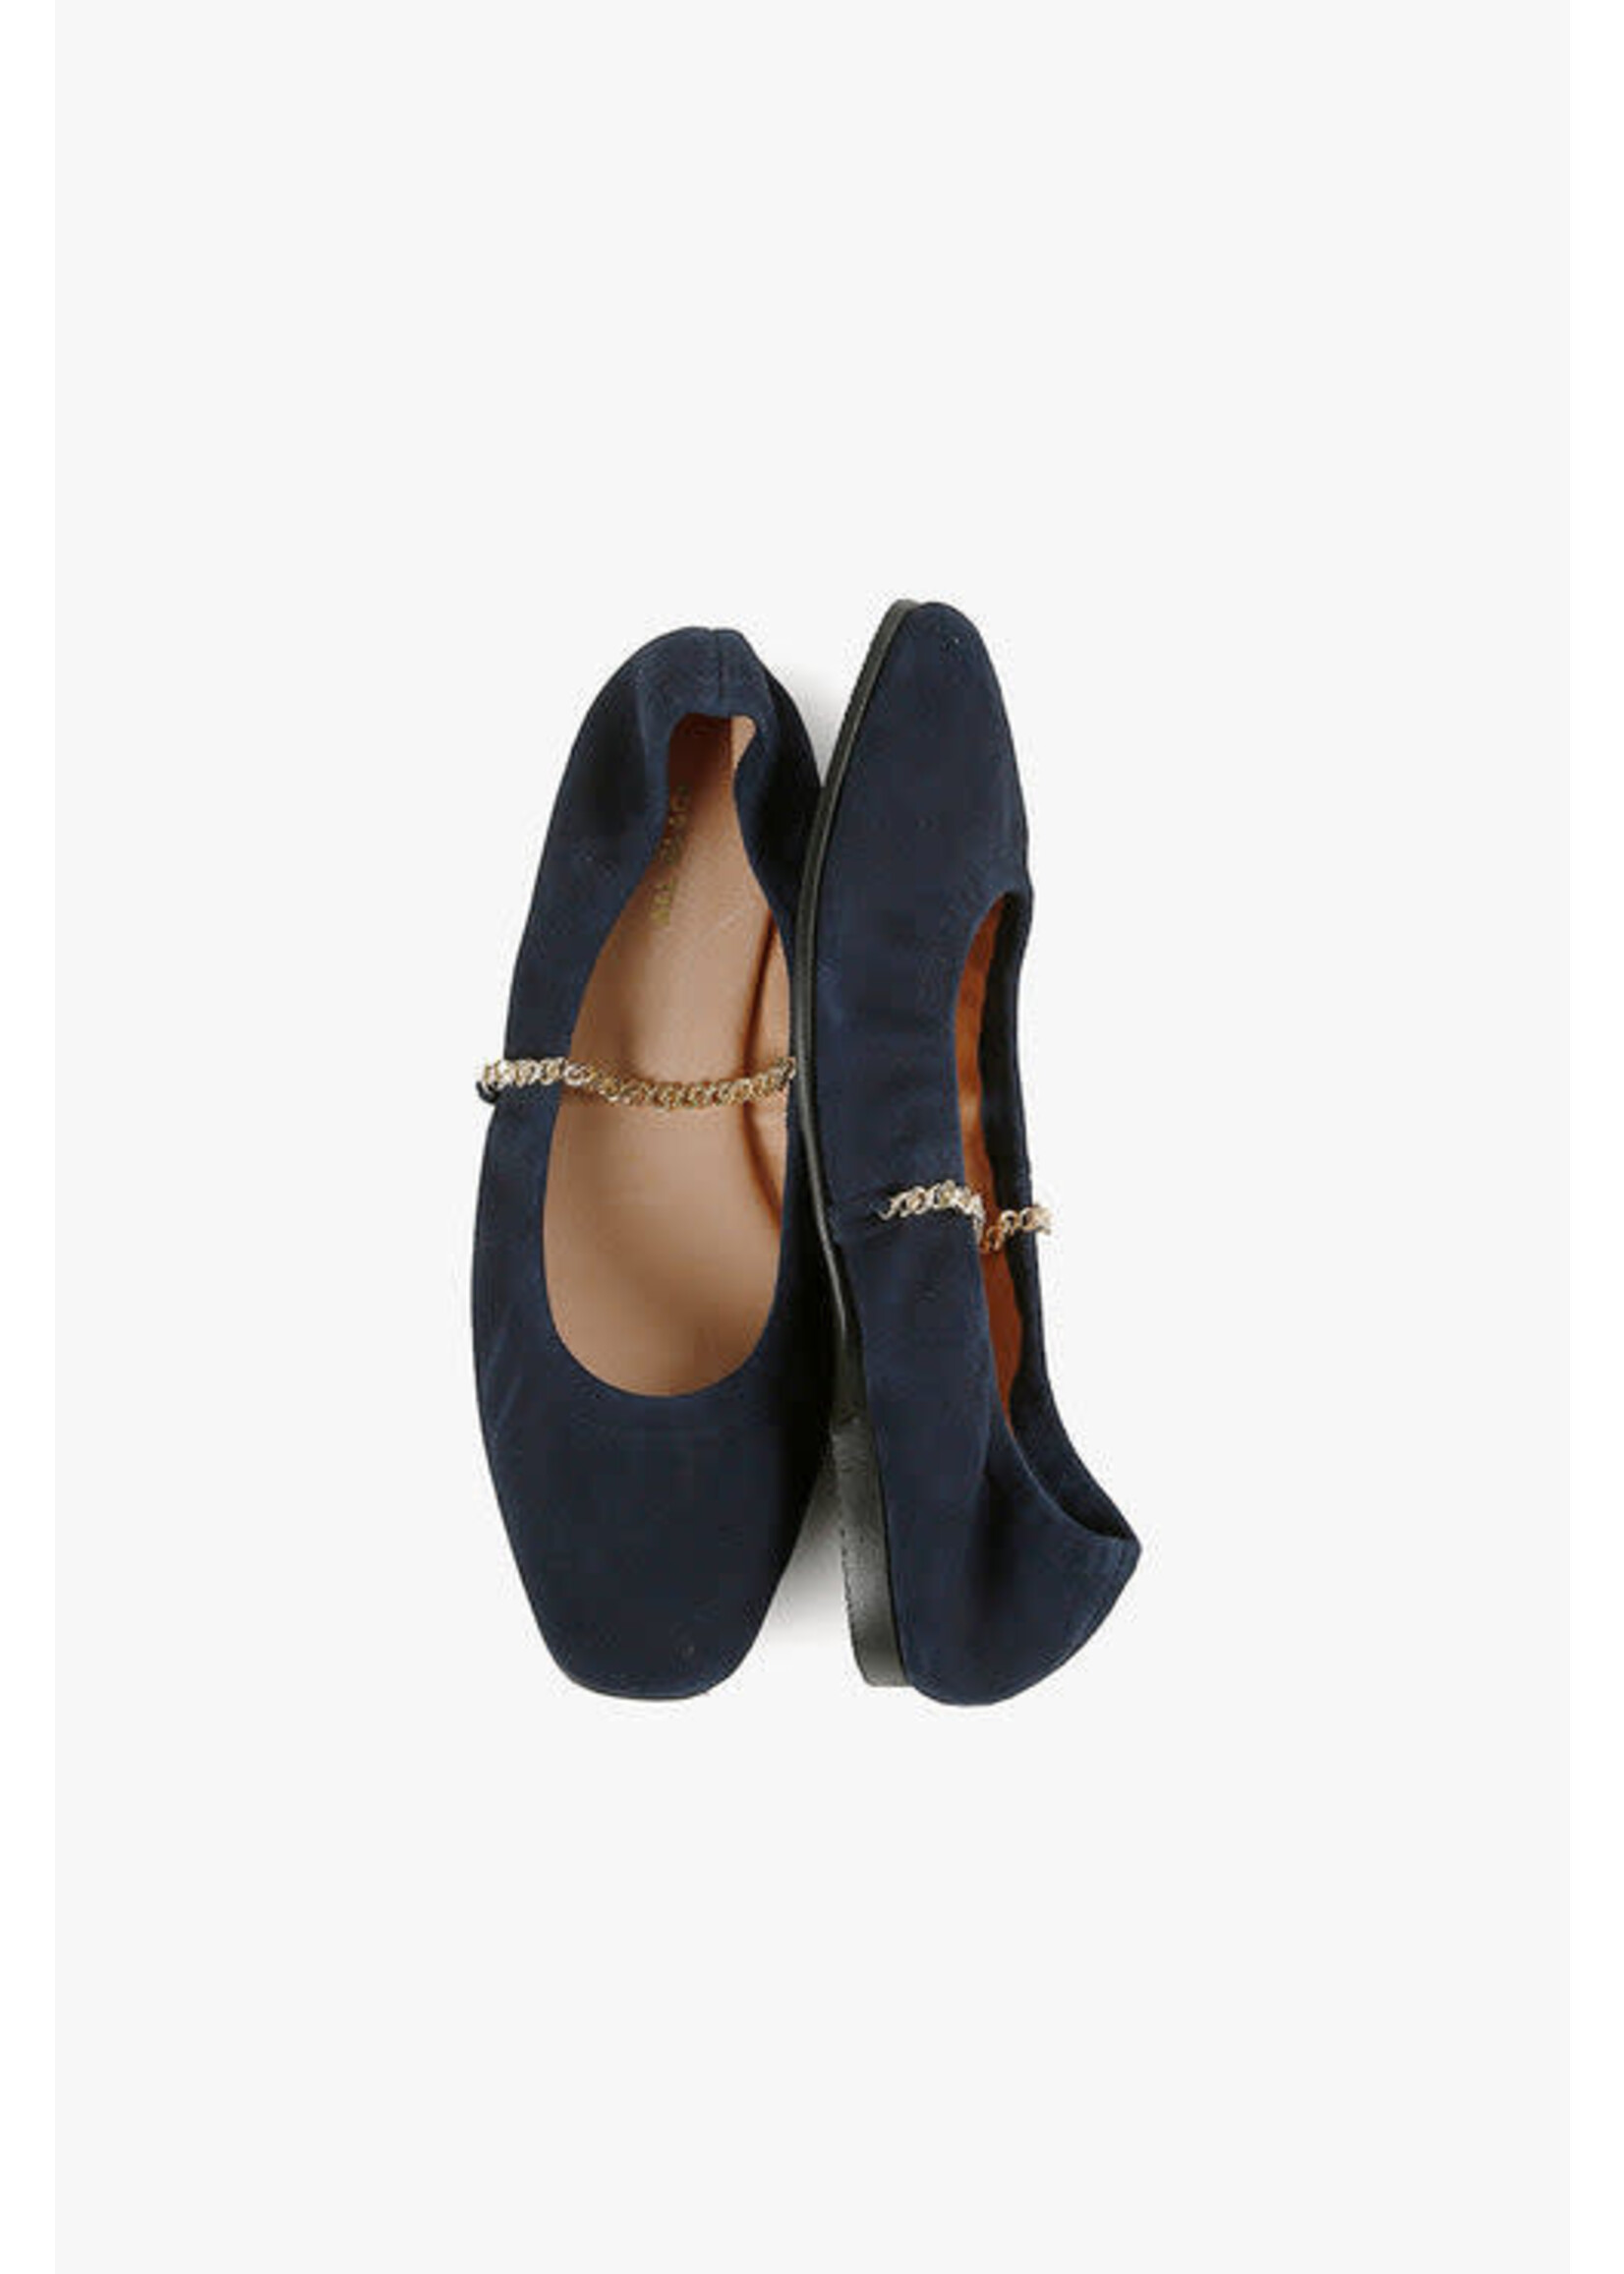 ALL BLACK Coco Ballet in Navy Kid Suede with Gold Chain by ALL BLACK  Footwear